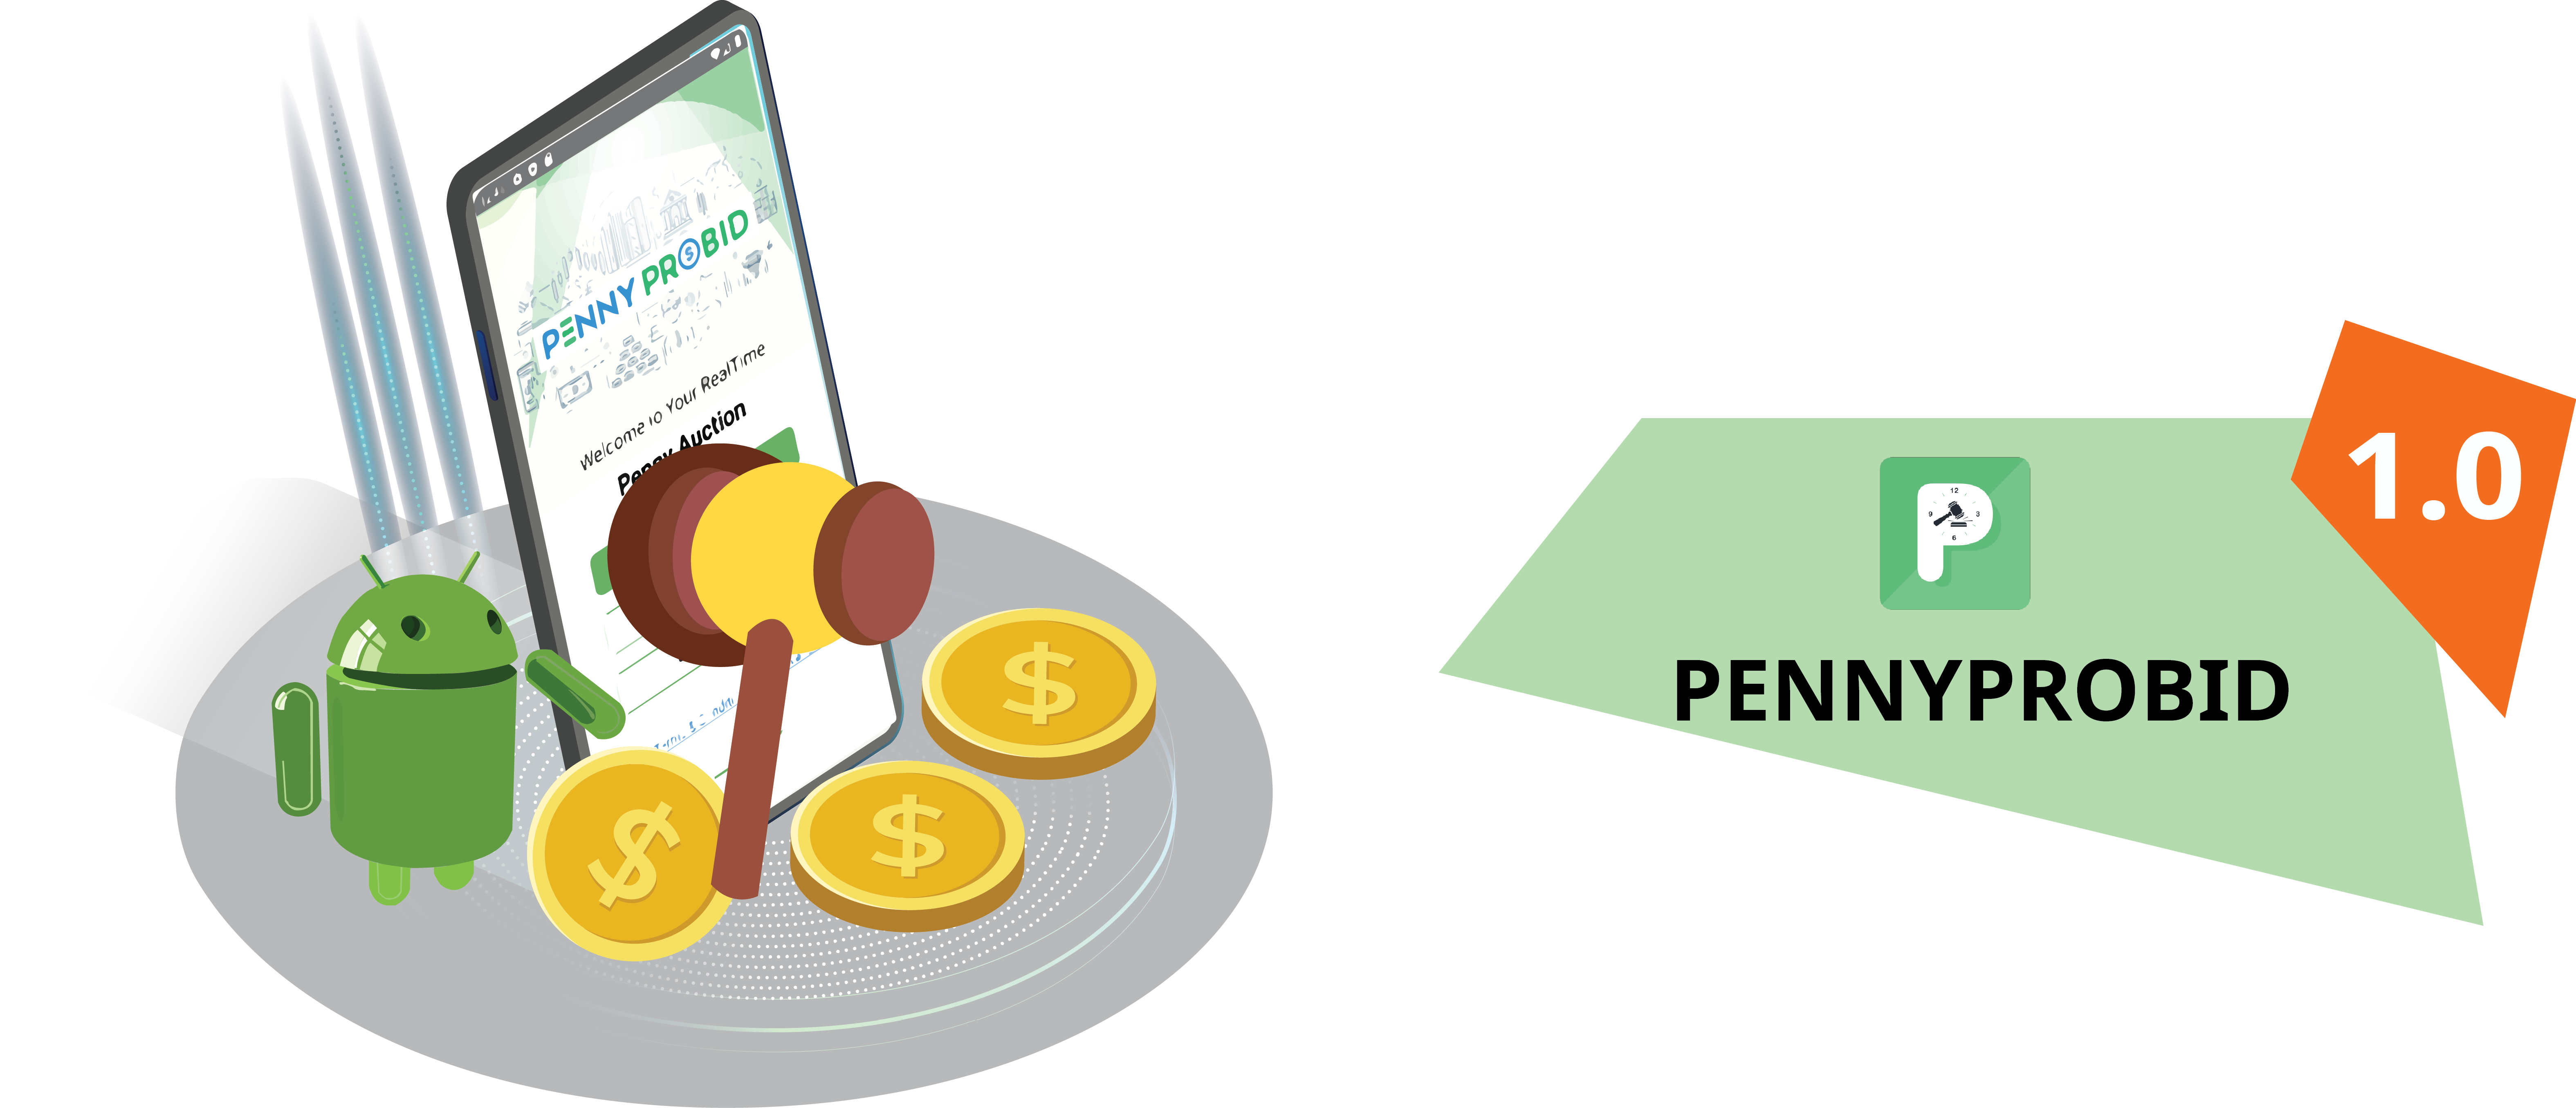 An Android App for E-Commerce and Penny Auction. Combination of Mobile app and PHP backend tool for easy administration.